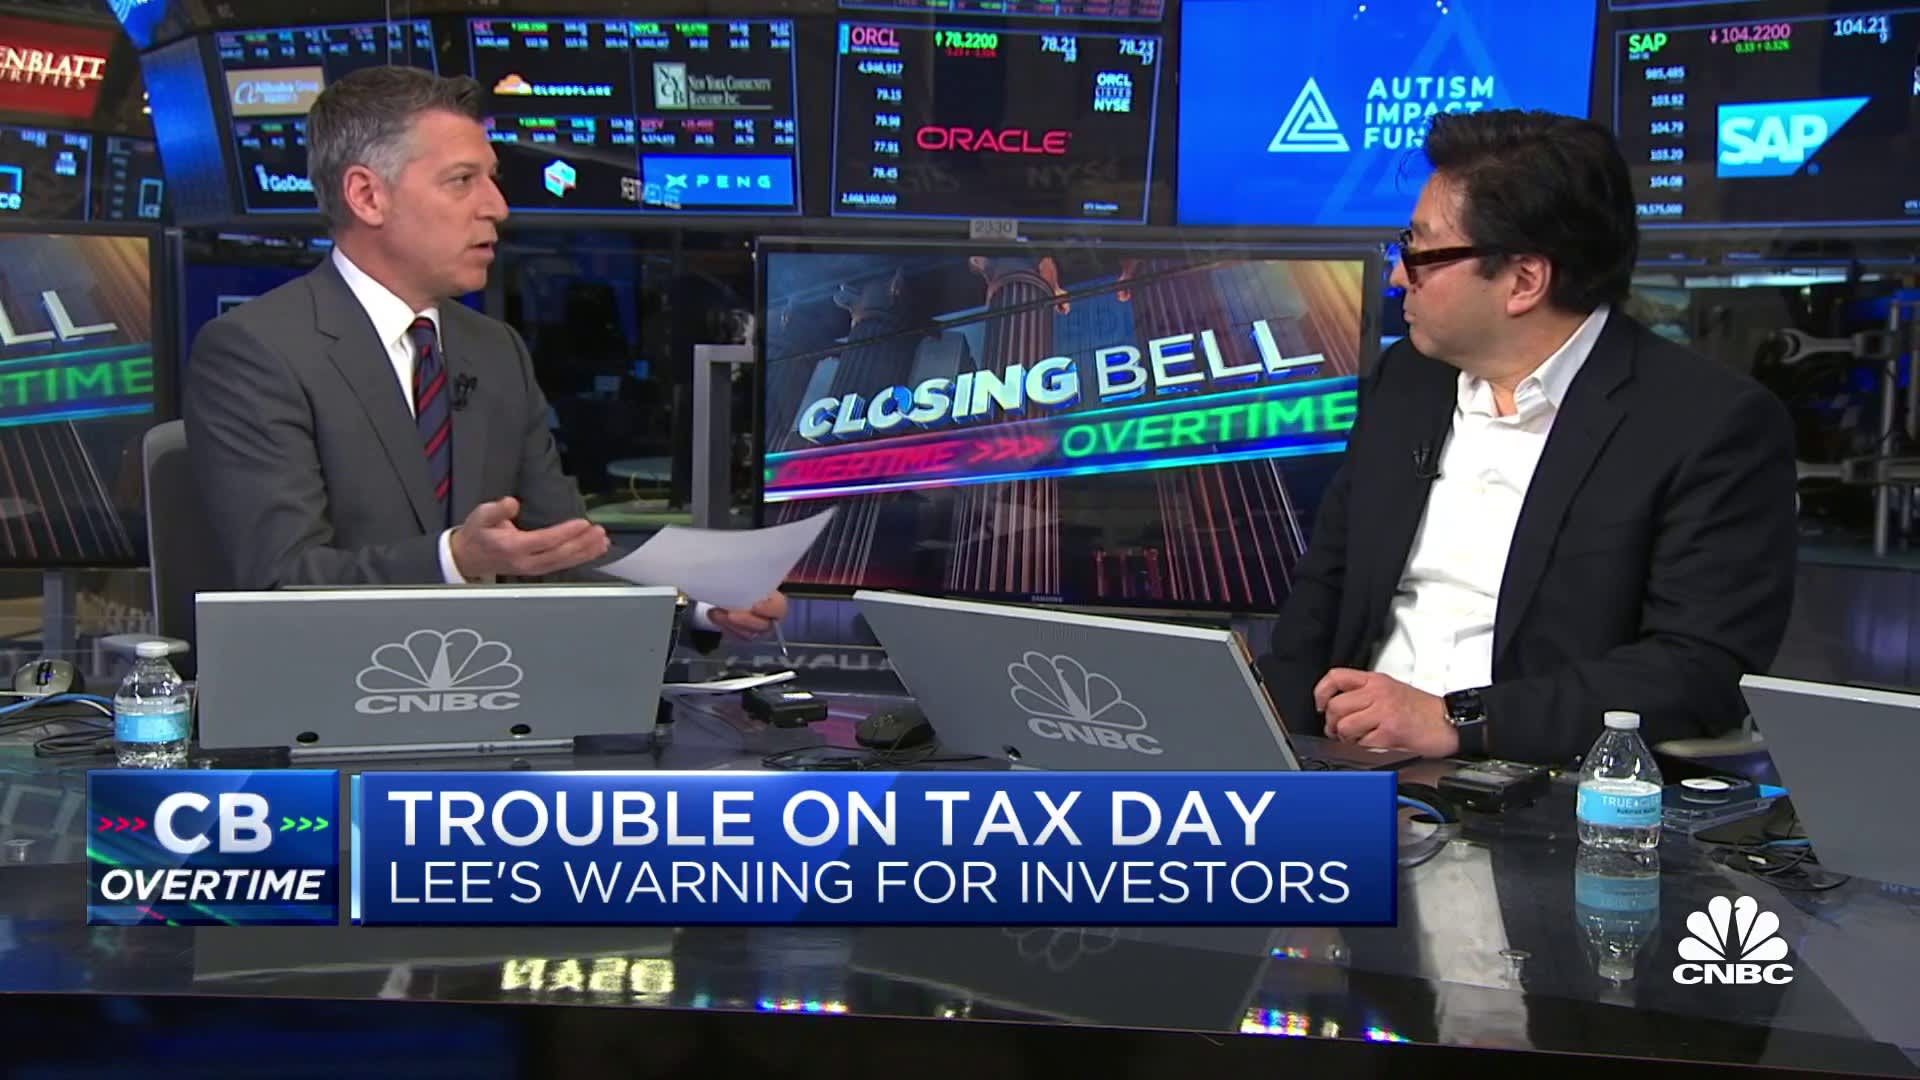 Fundstrat's Tom Lee: Hopefully the passing of tax day ends indiscriminate  selling